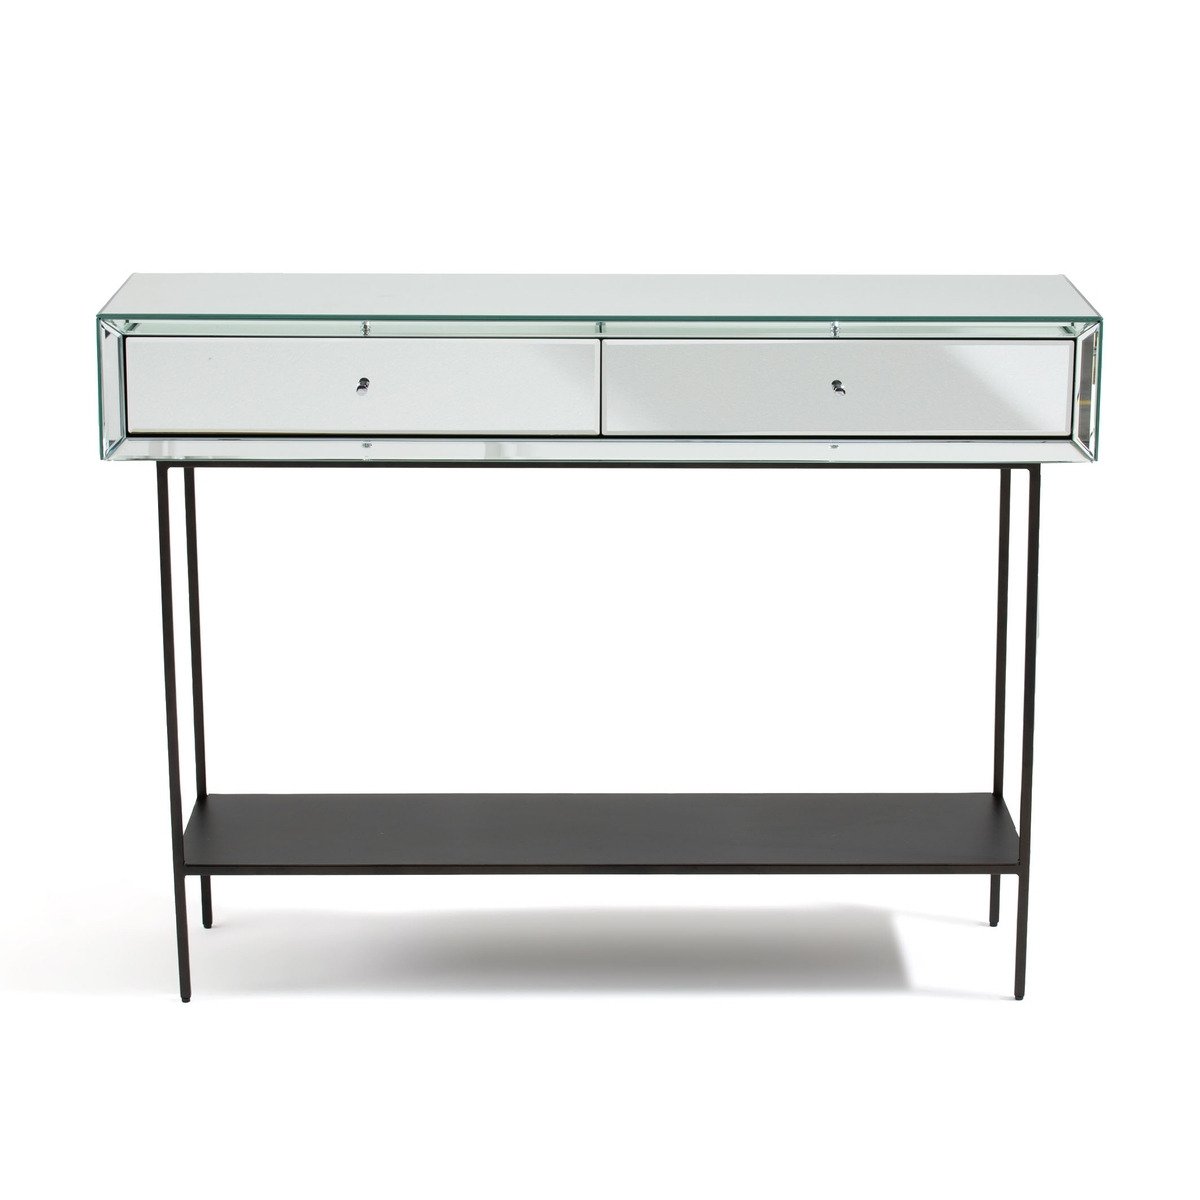 Khonsou Mirrored Console Table - image 1